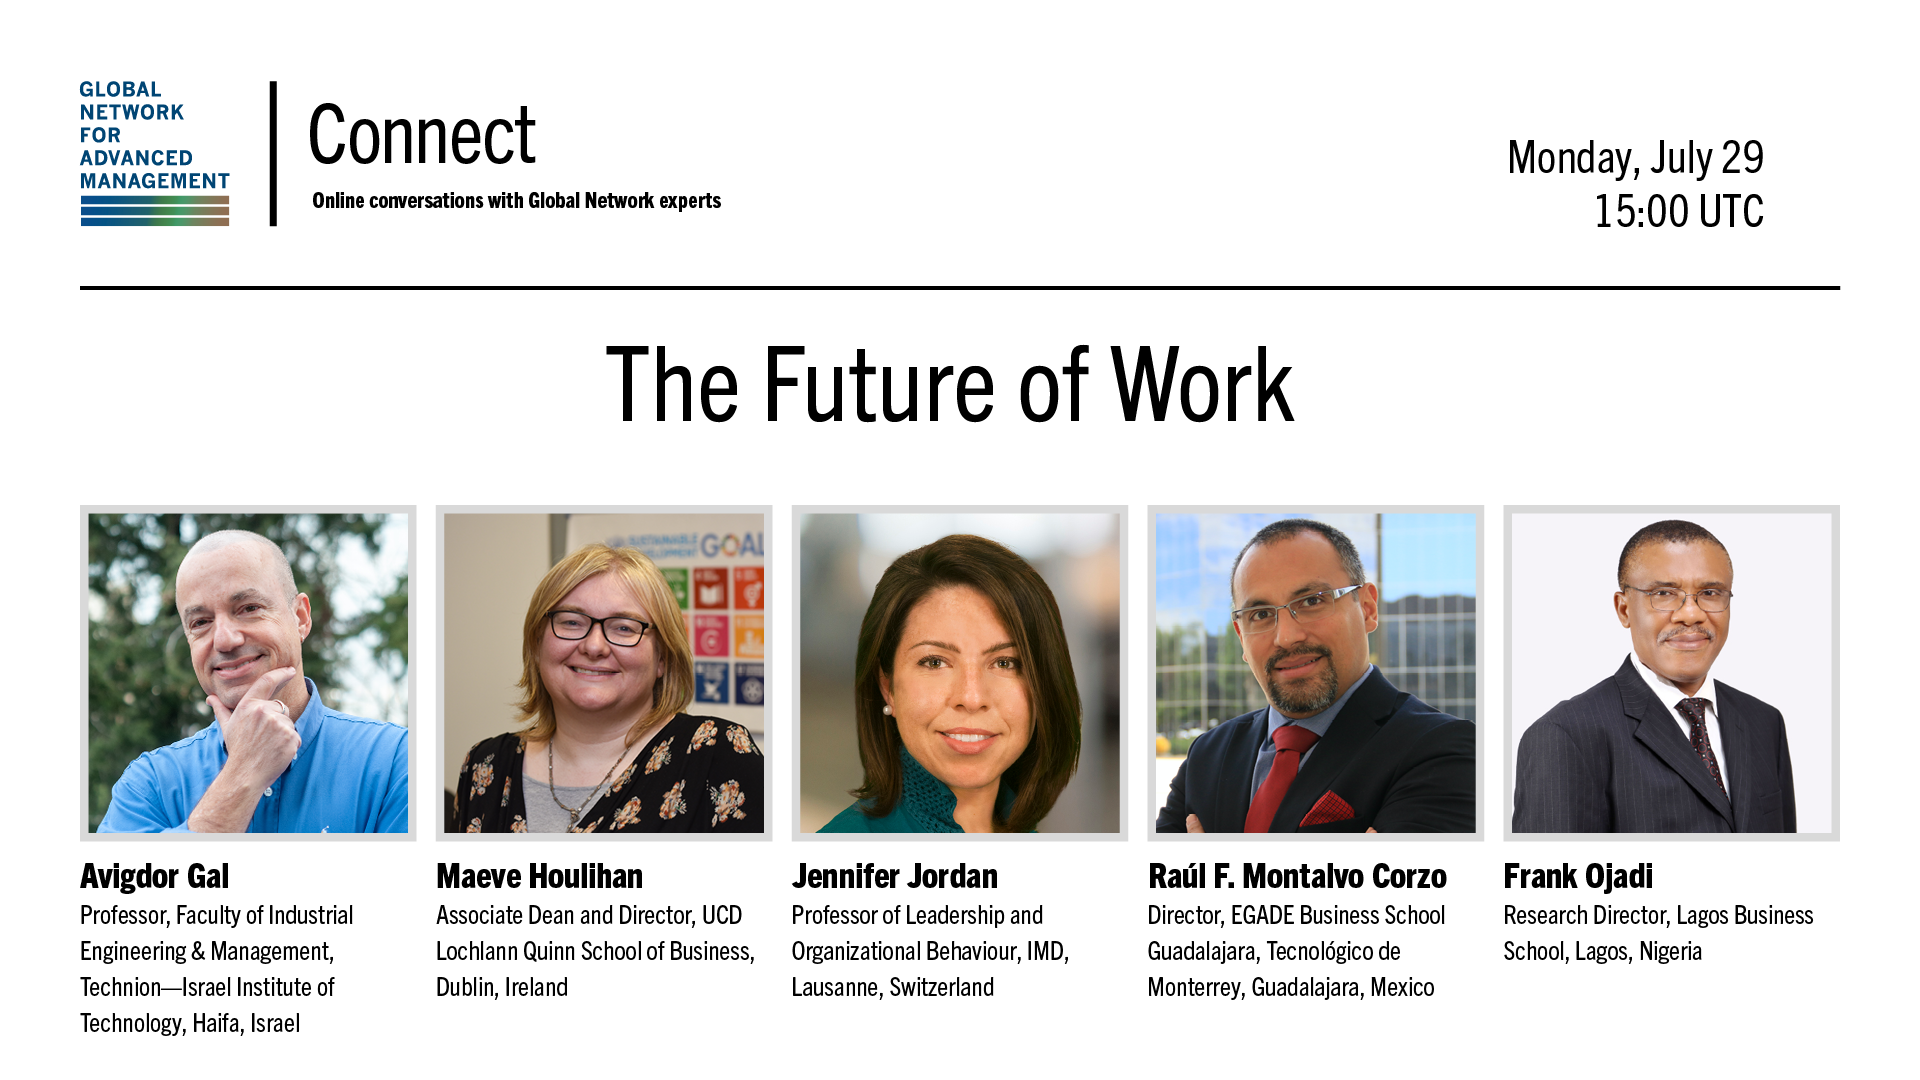 Panelists for the Future of Work event